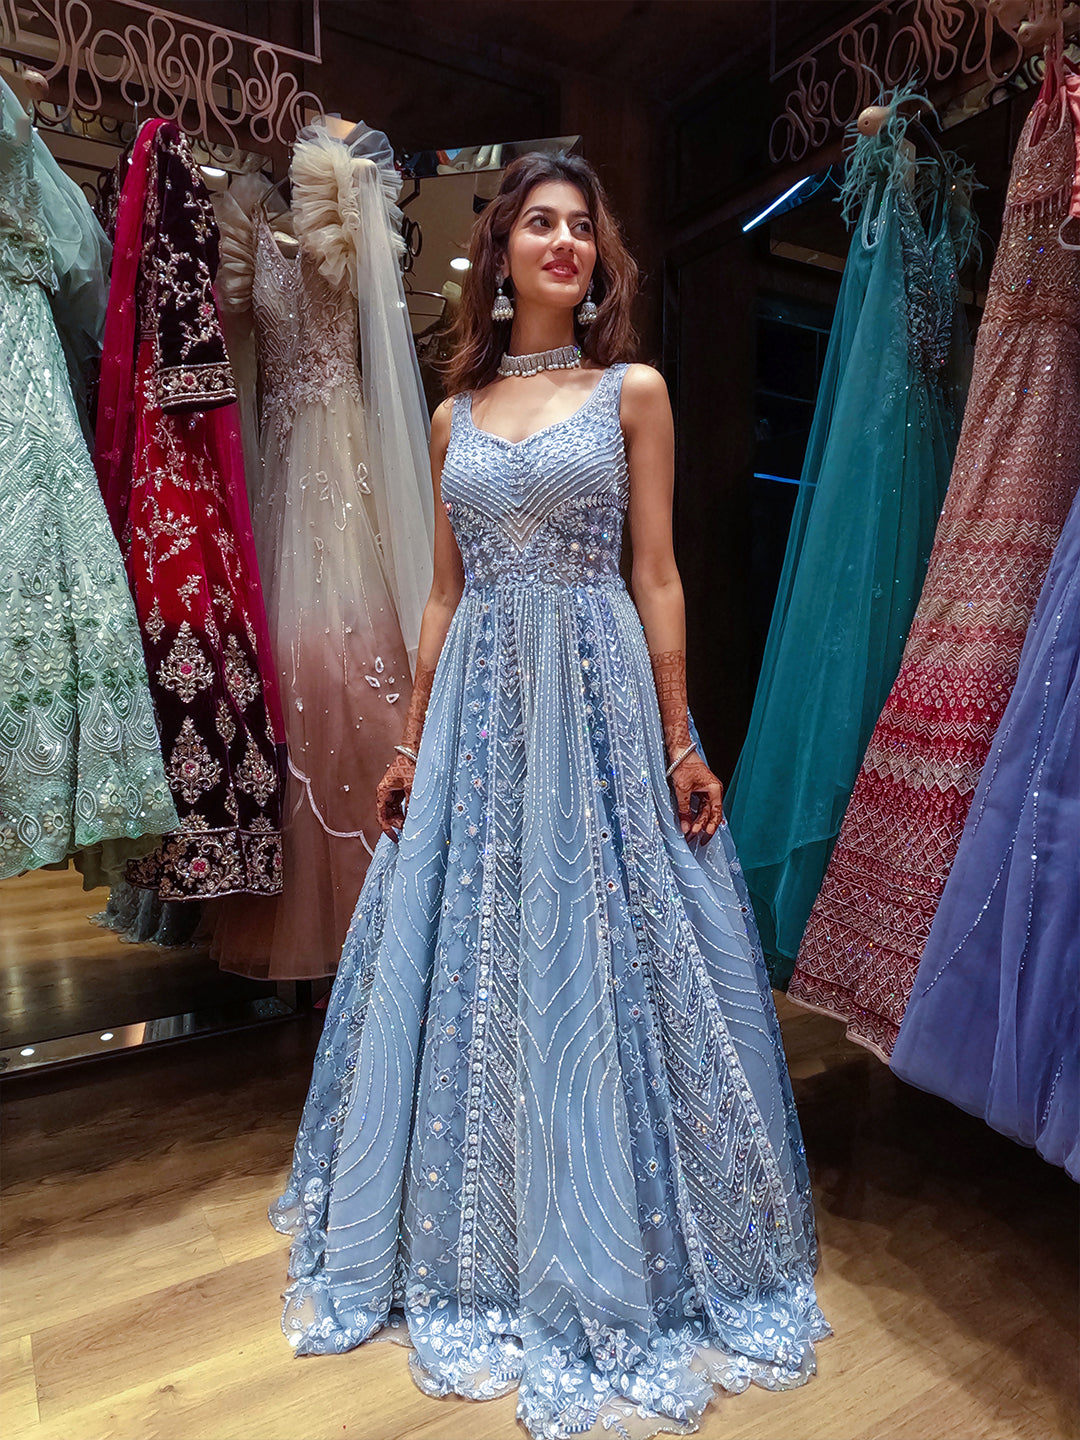 New Tailed Grey Ball Gown Princess Dress Evening Gown 2018  China Evening  Dress and Evening Gown price  MadeinChinacom